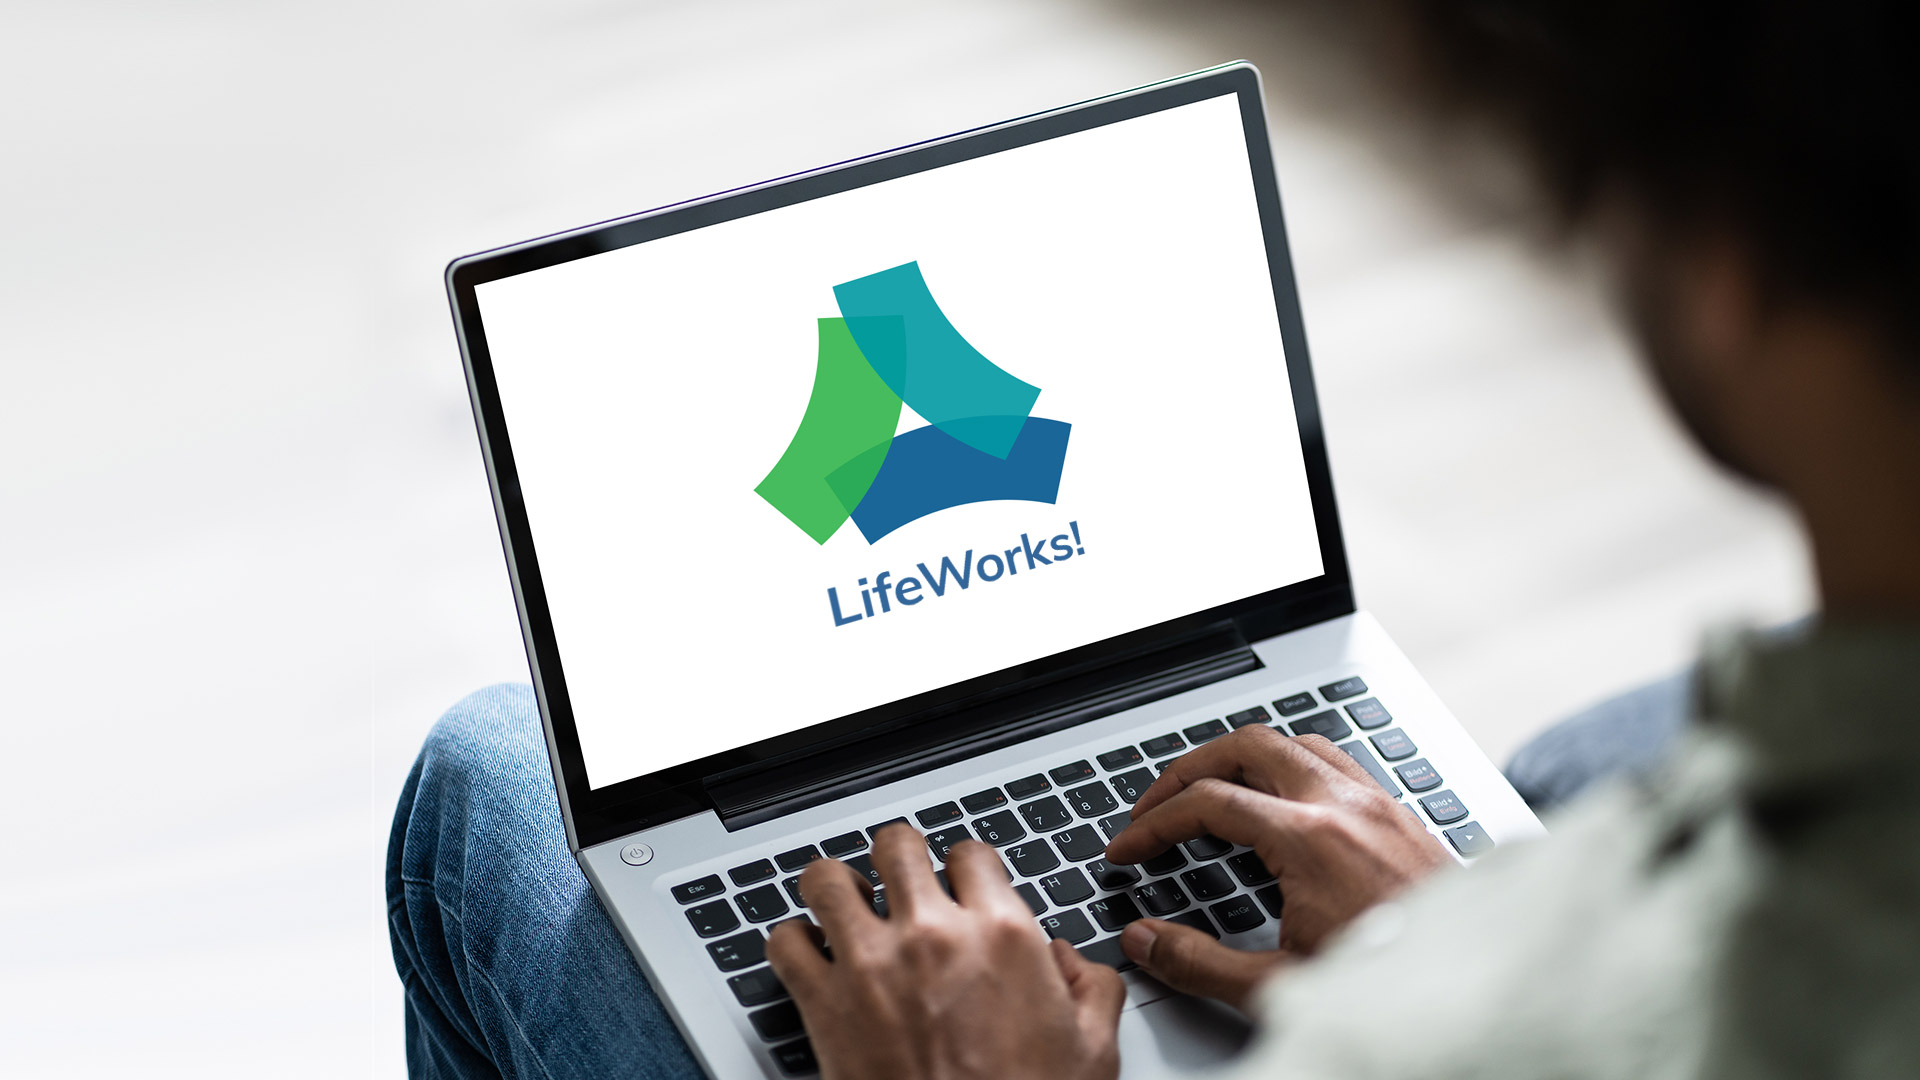 LifeWorks! goes virtual with online employment readiness training